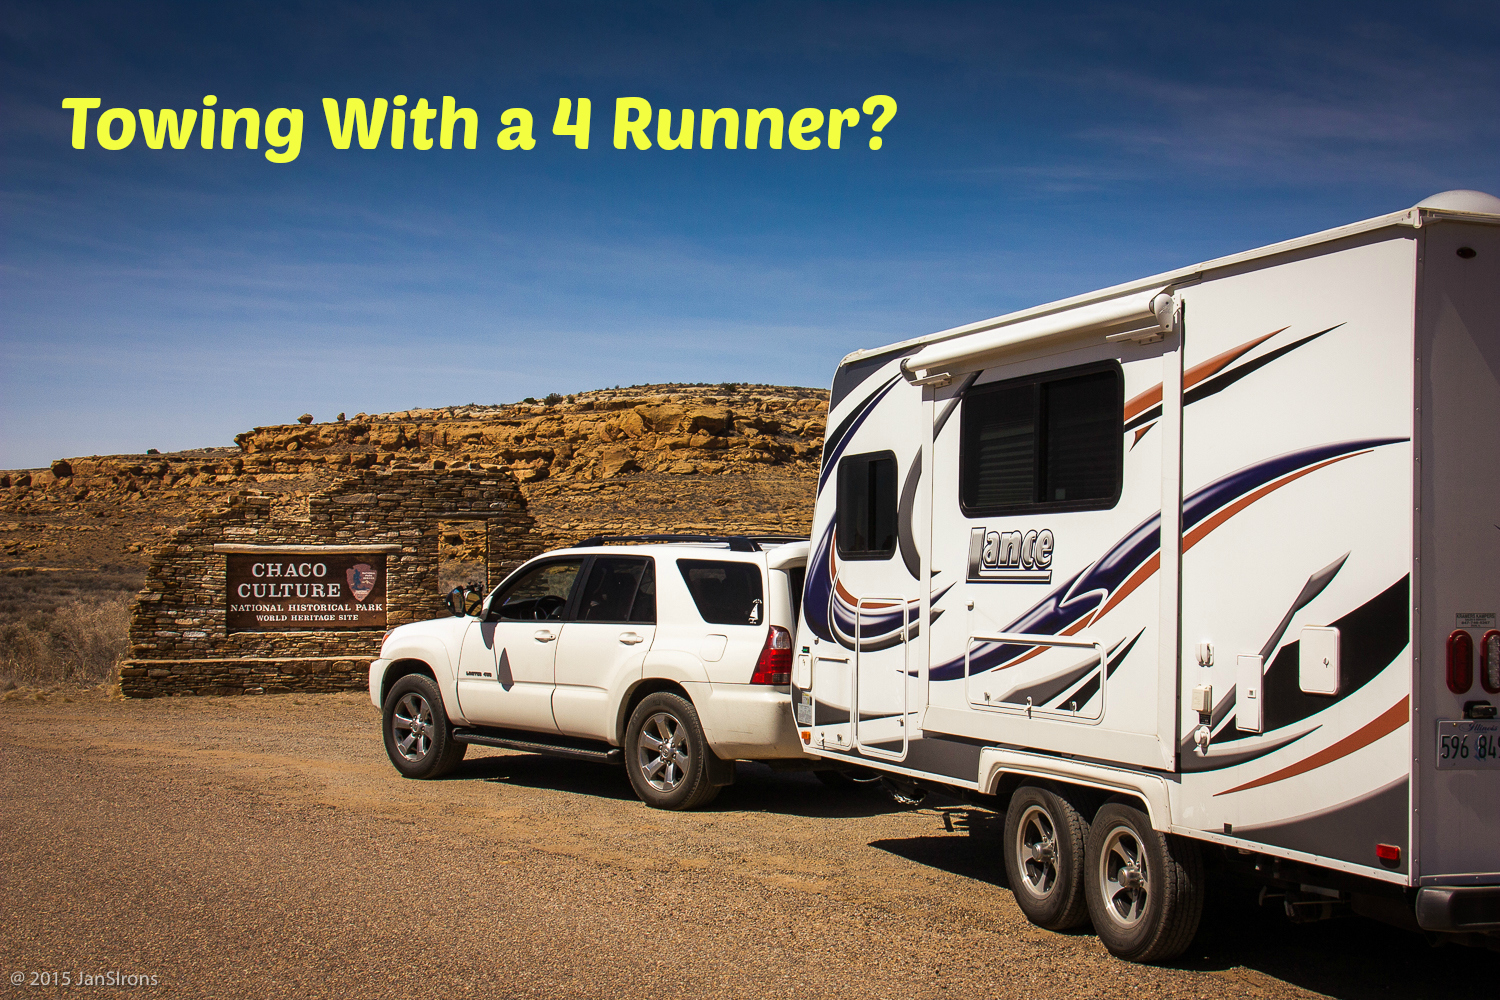 Towing A Travel Trailer With A 6 Cyl Toyota 4 Runner Trailer